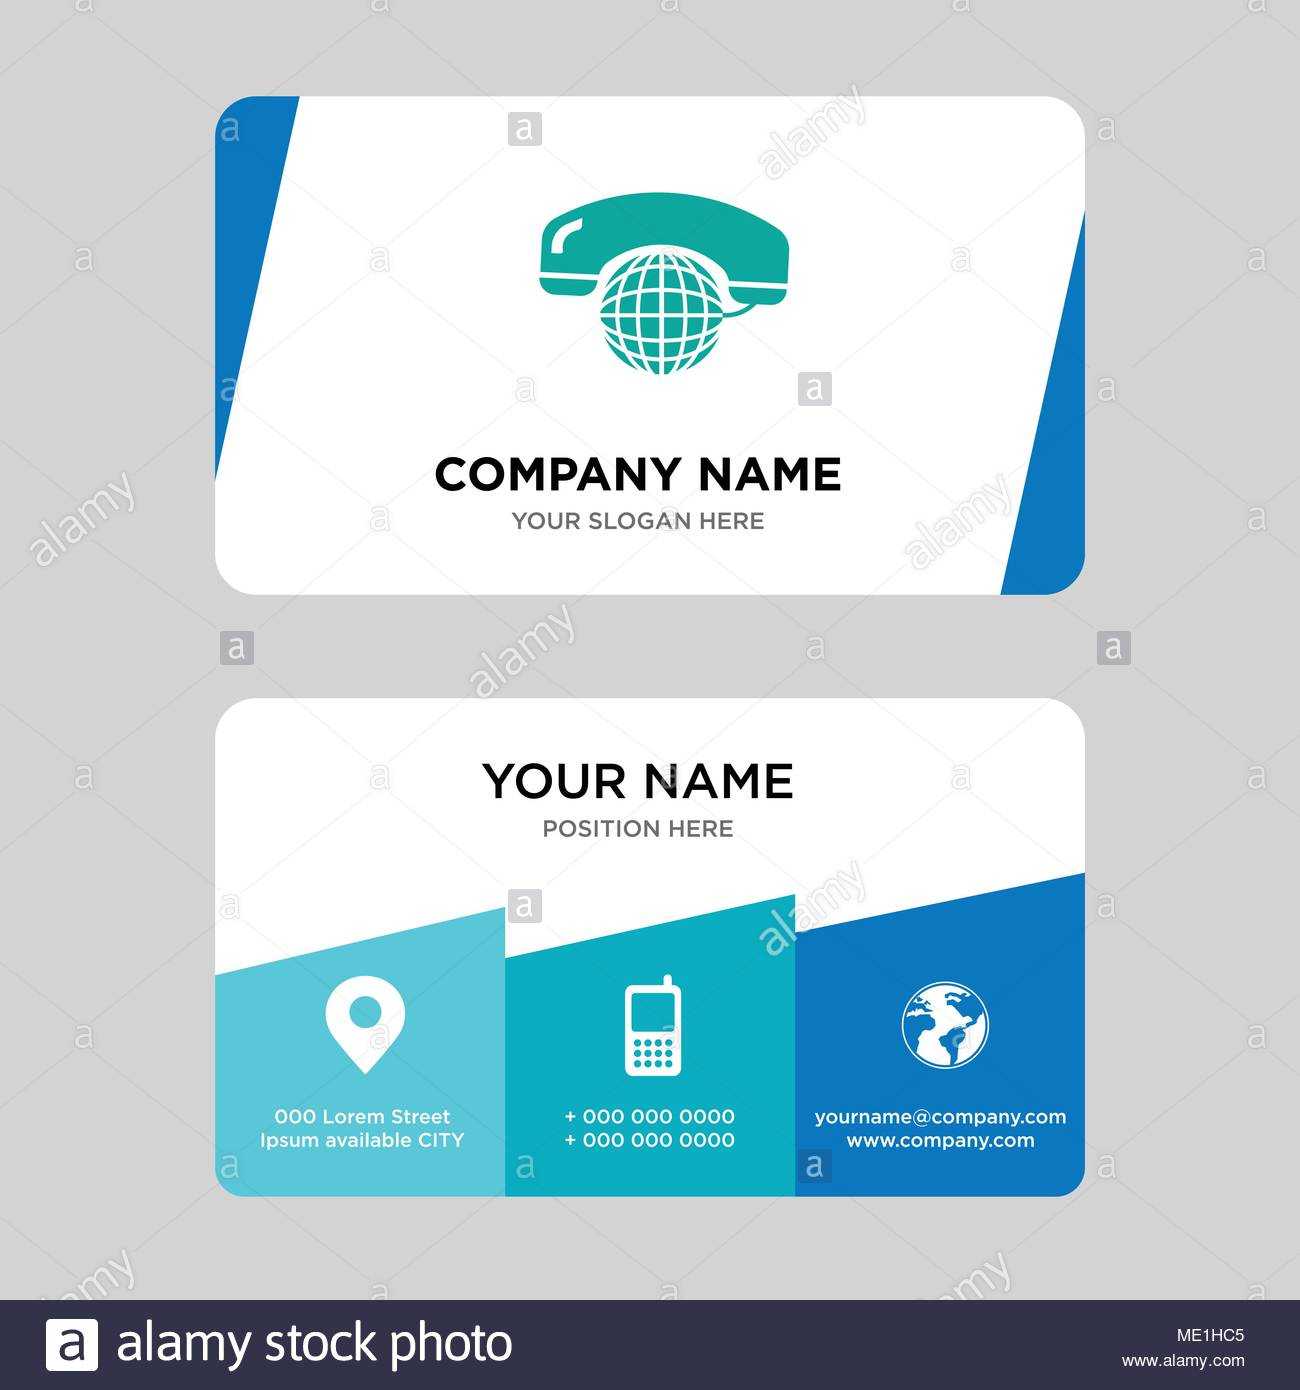 International Calling Service Business Card Design Template For Template For Calling Card